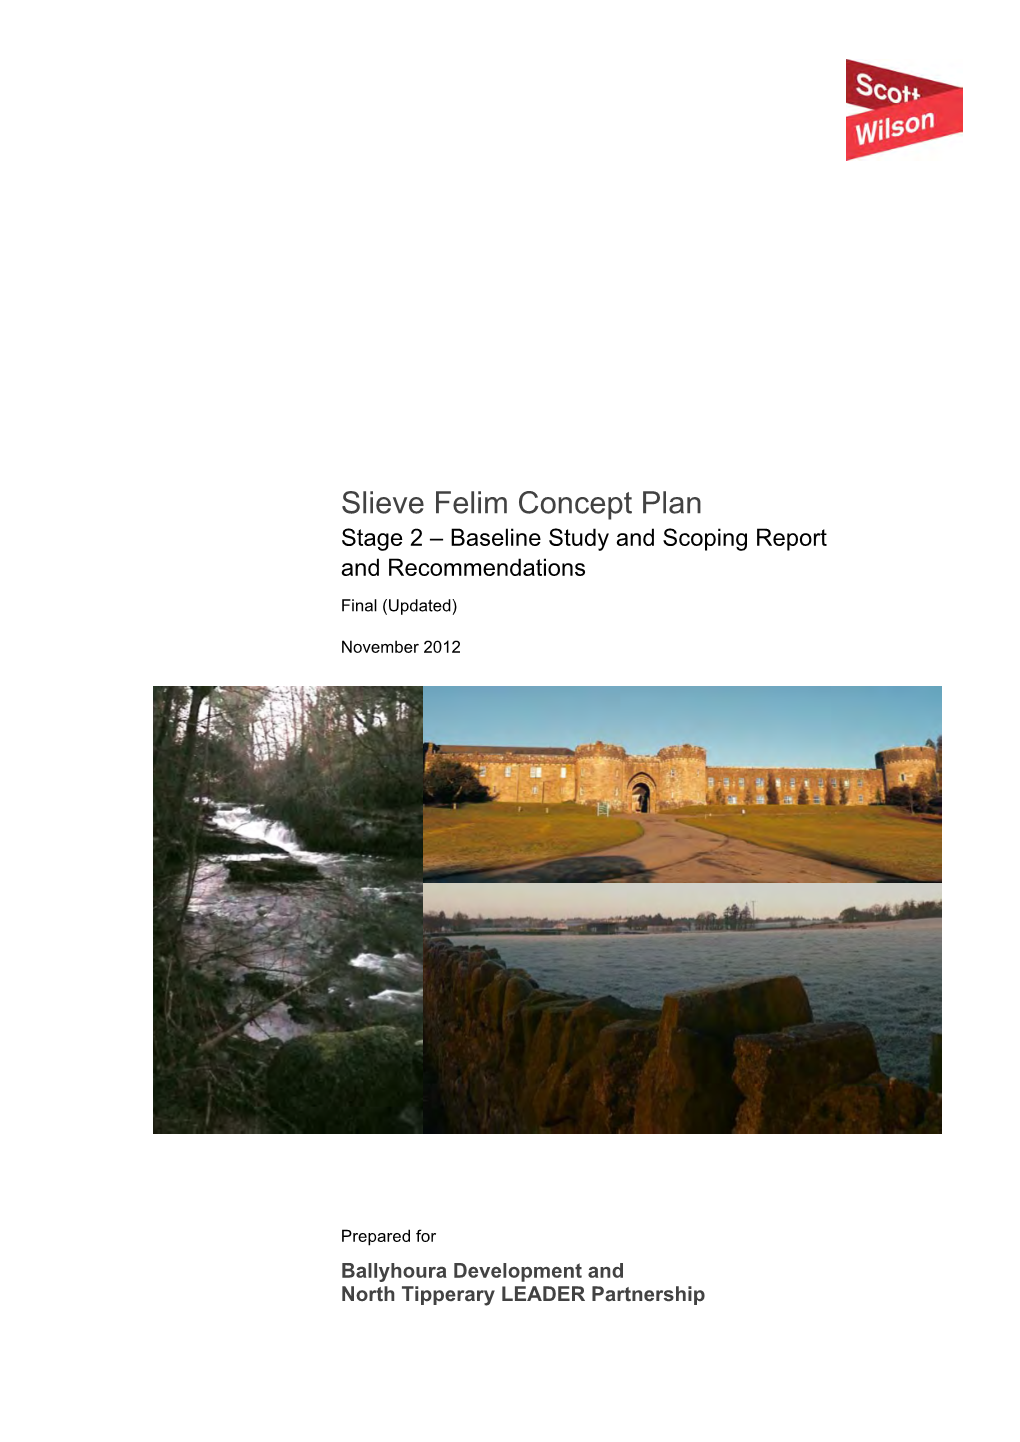 Slieve Felim Concept Plan Stage 2 – Baseline Study and Scoping Report and Recommendations Final (Updated)